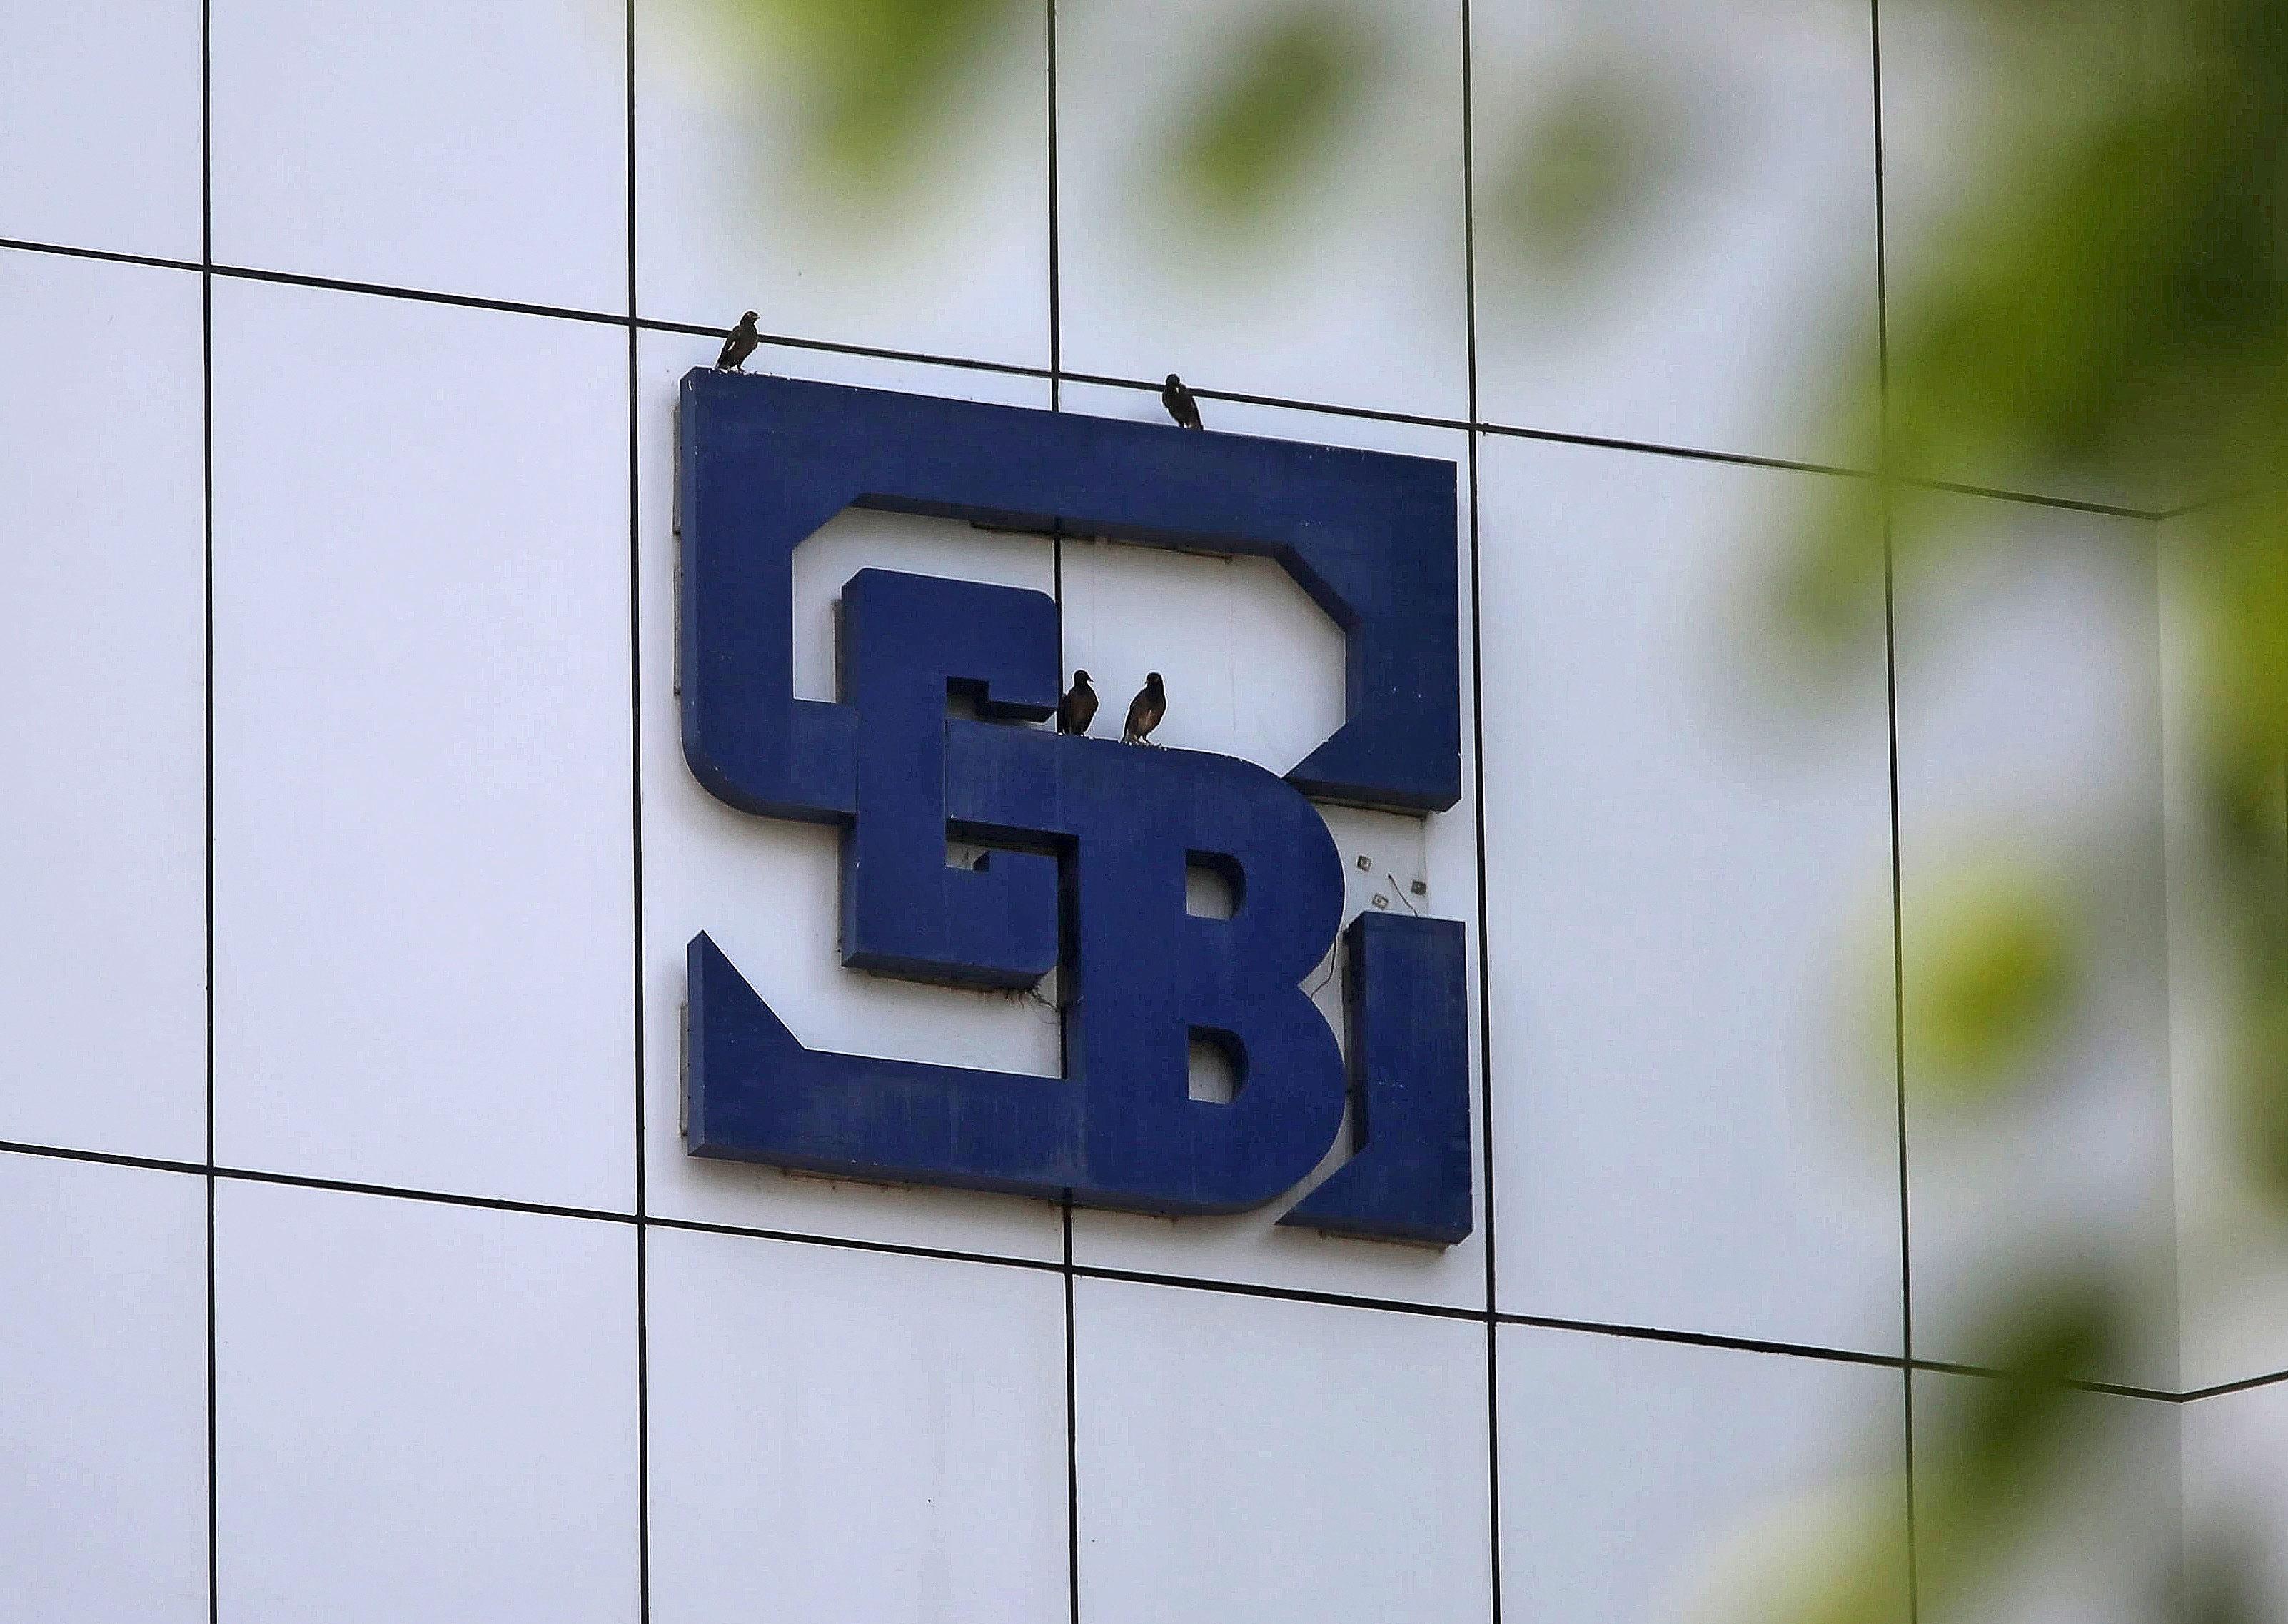 SEBI chief cautions on corporate debt investments